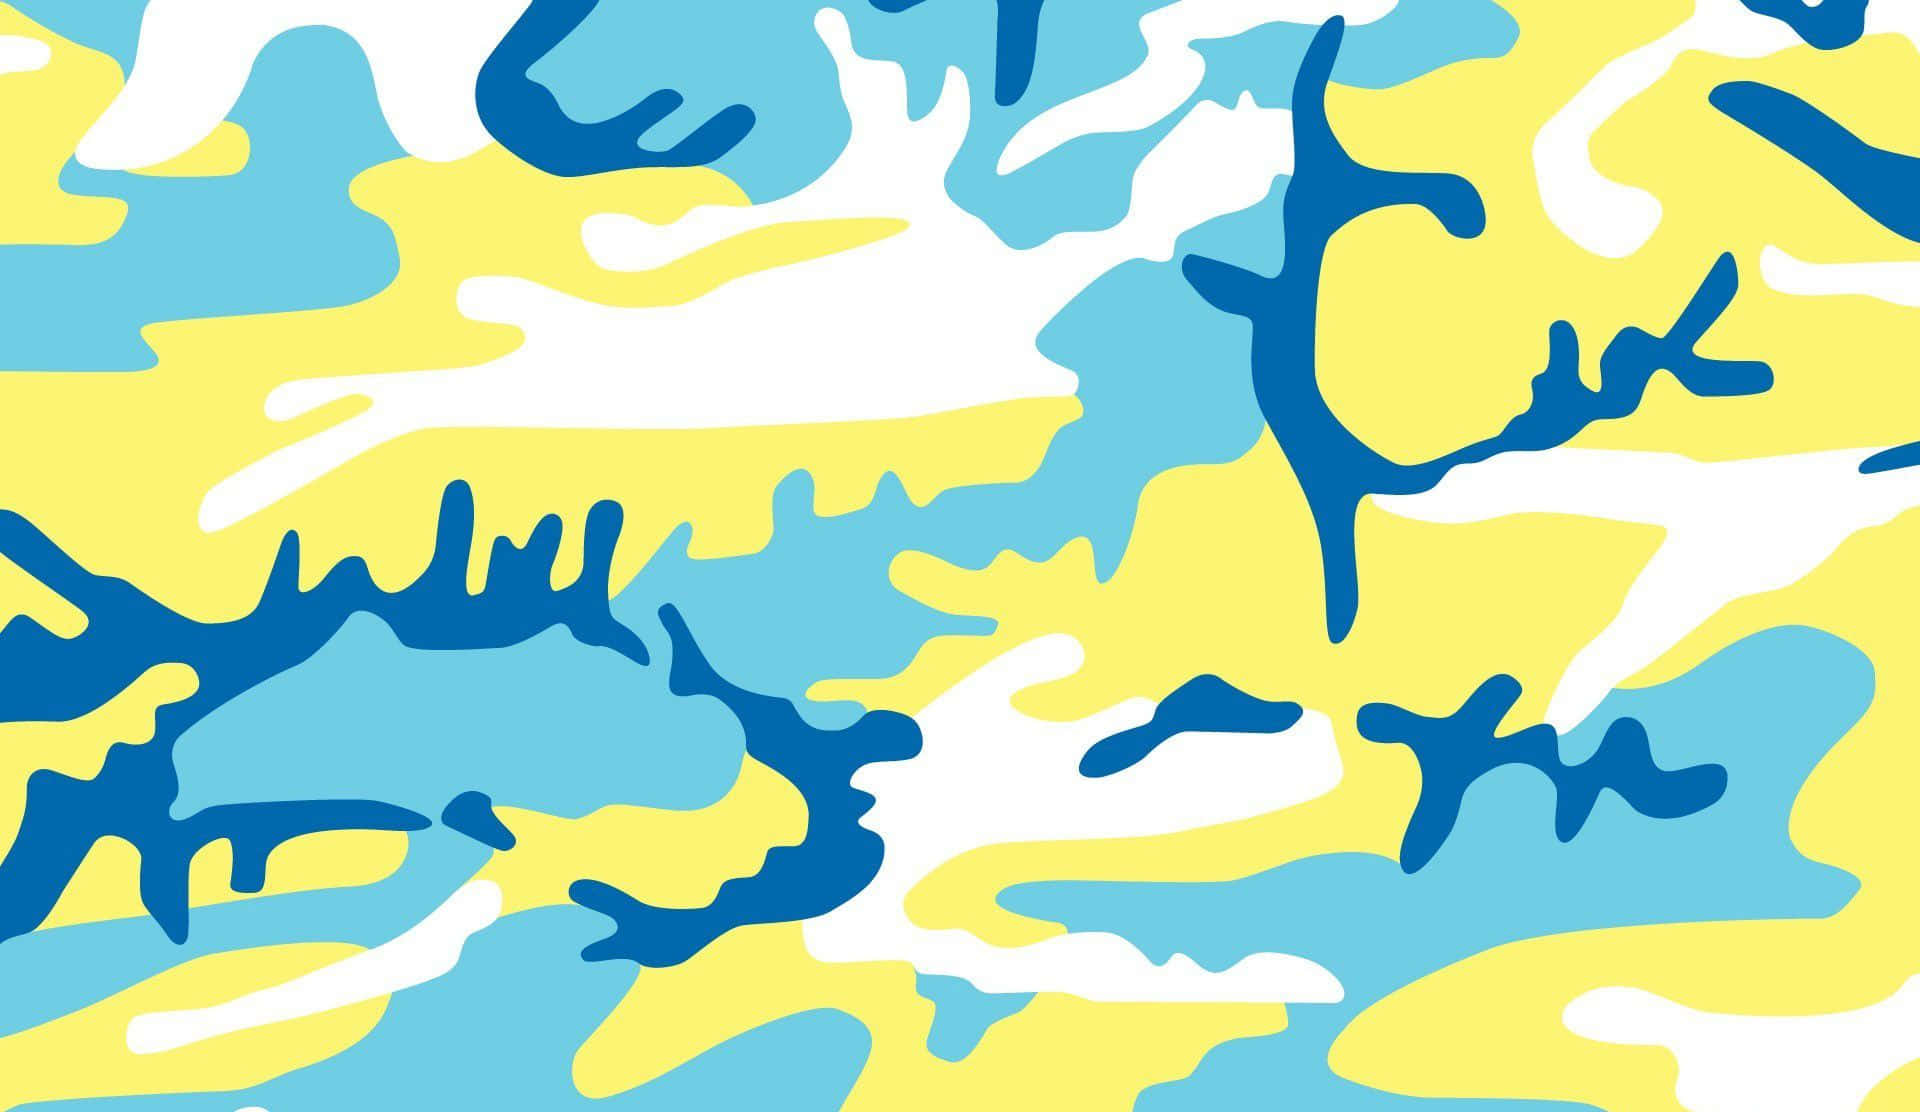 Enhance any military look with our Blue Camo pattern Wallpaper